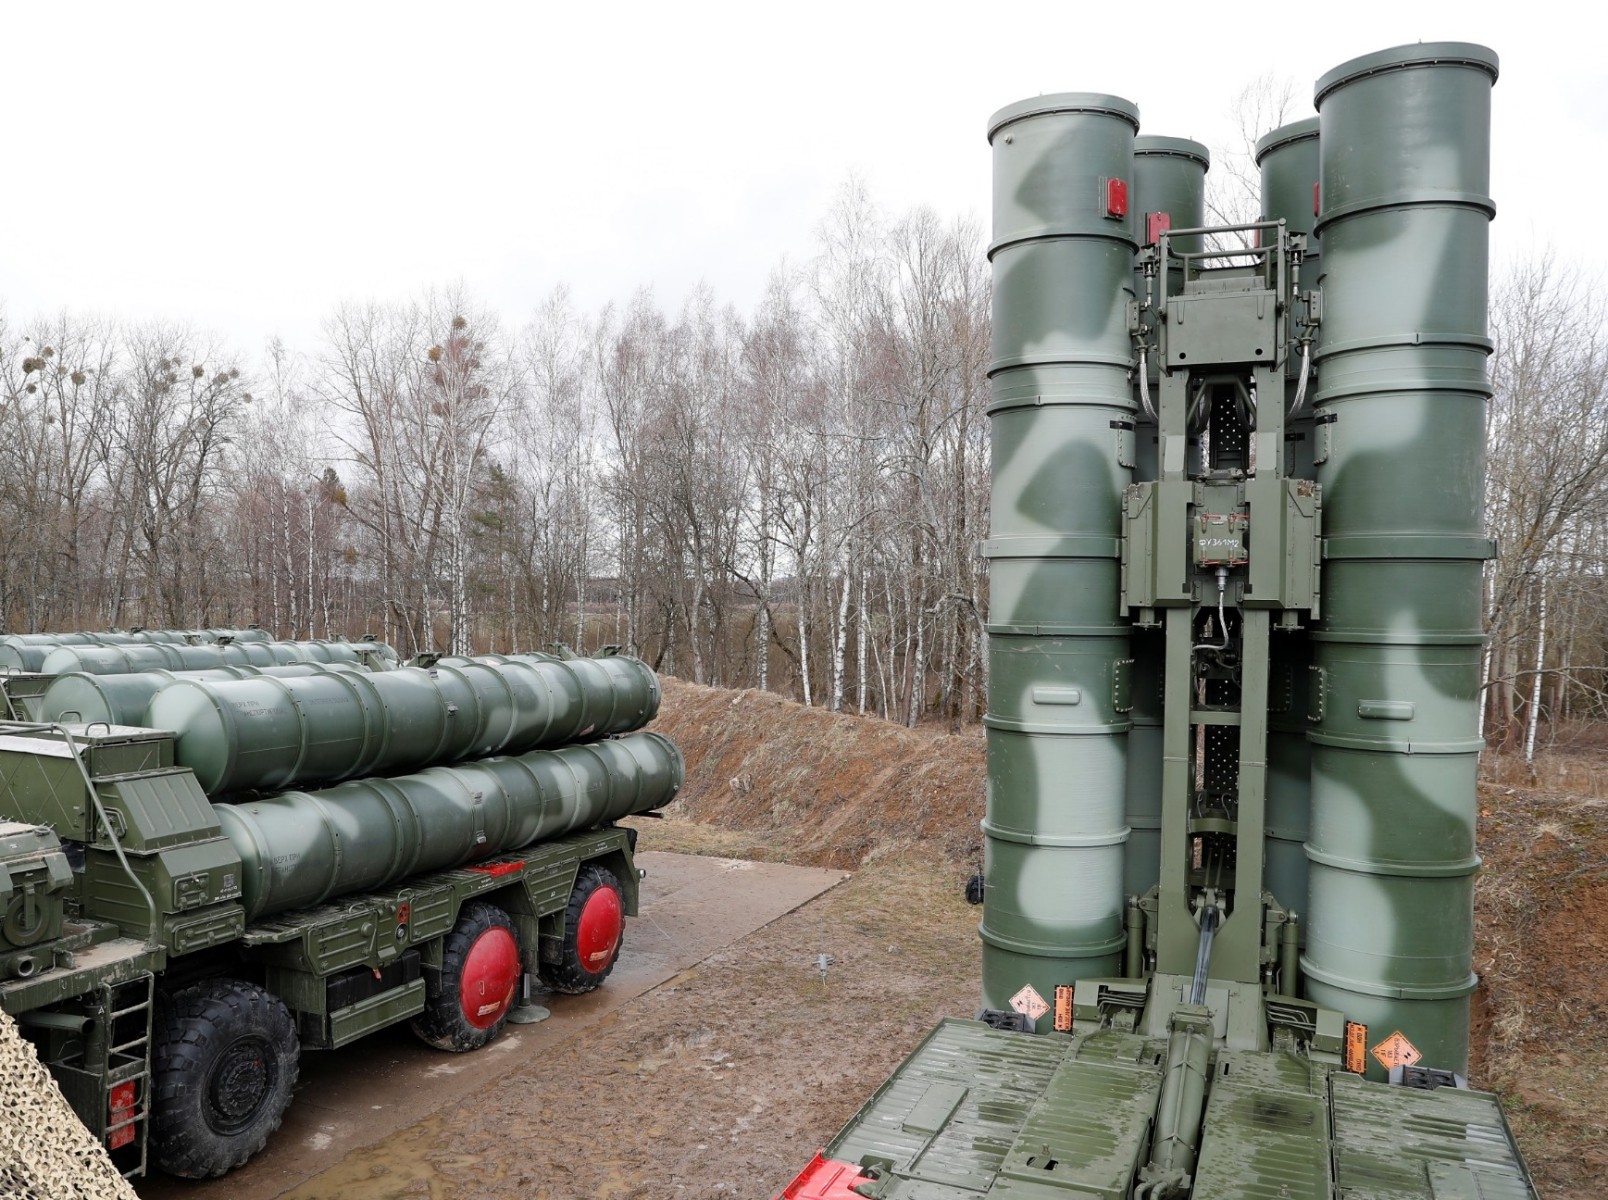 India to deploy Russian made S-400 missile system near China border: Report